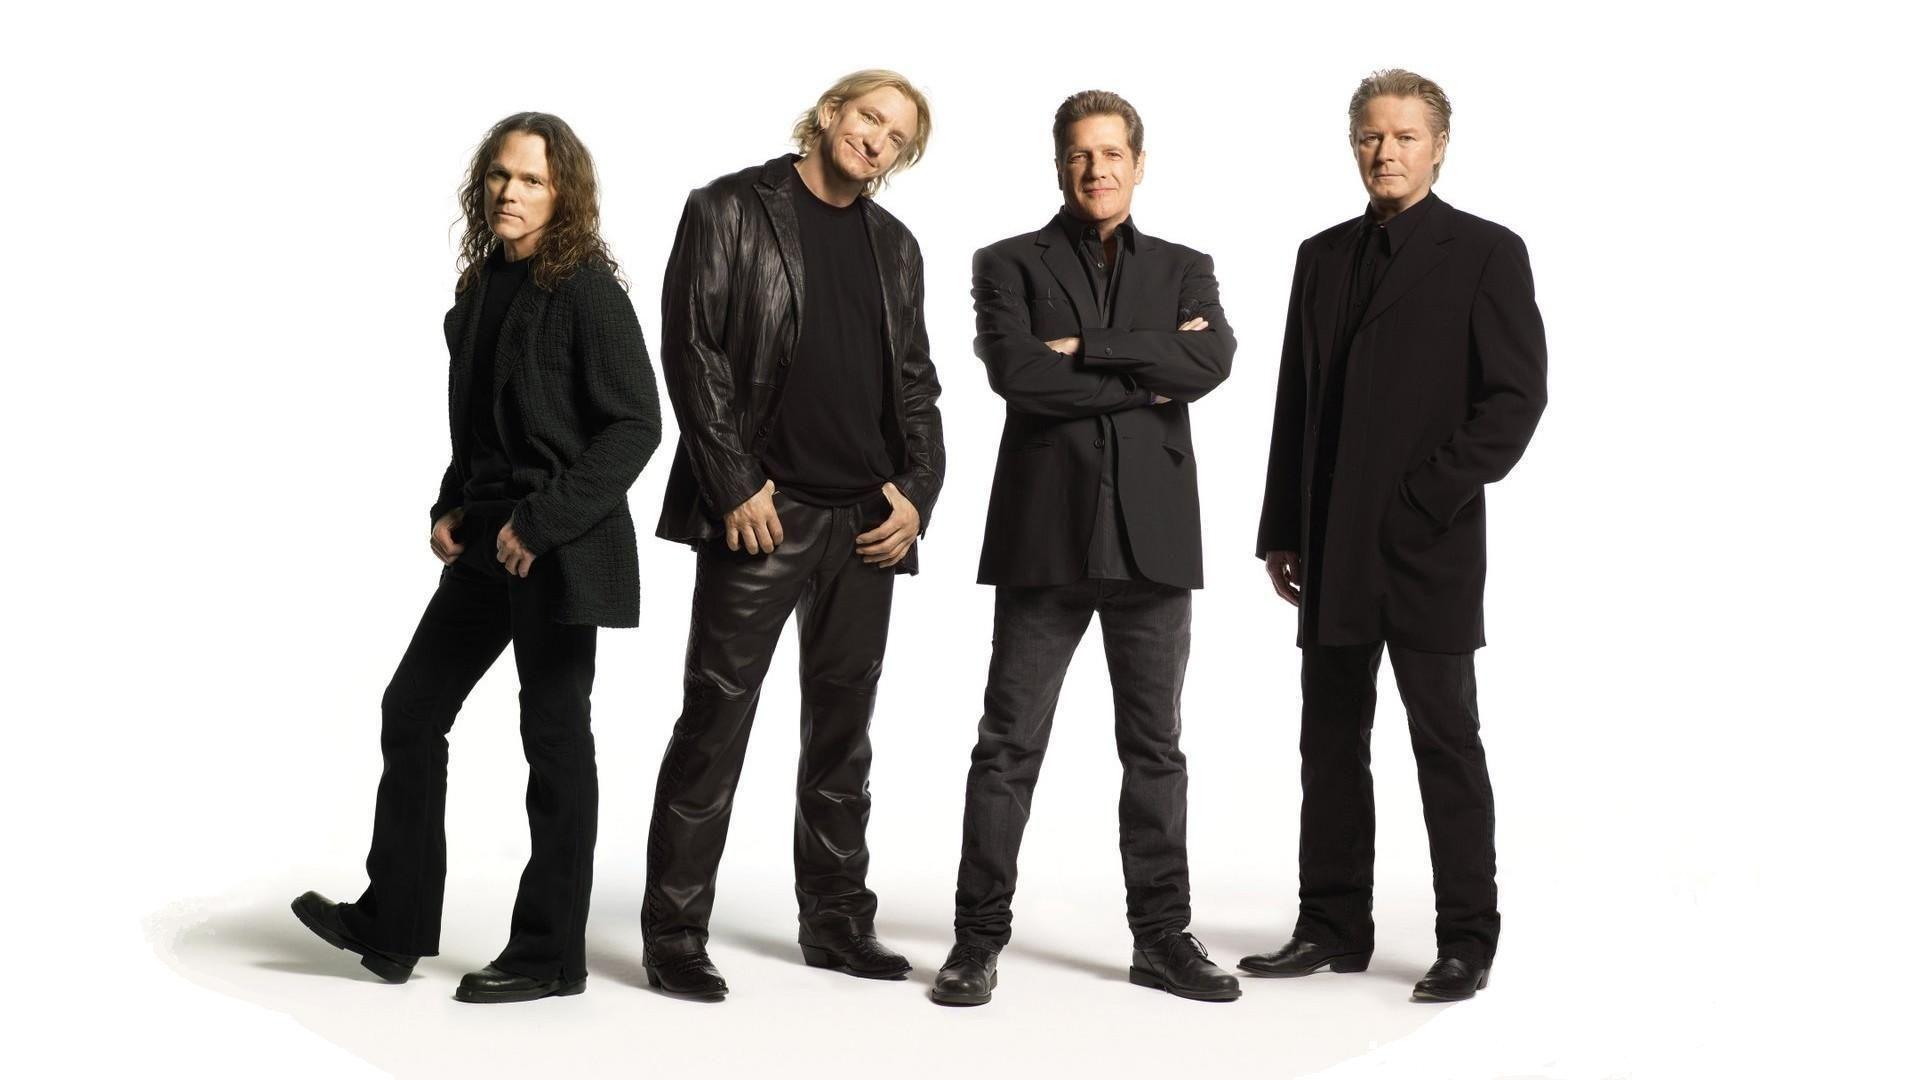 Download Wallpaper 1920x1080 The eagles, Faces, Look, Band